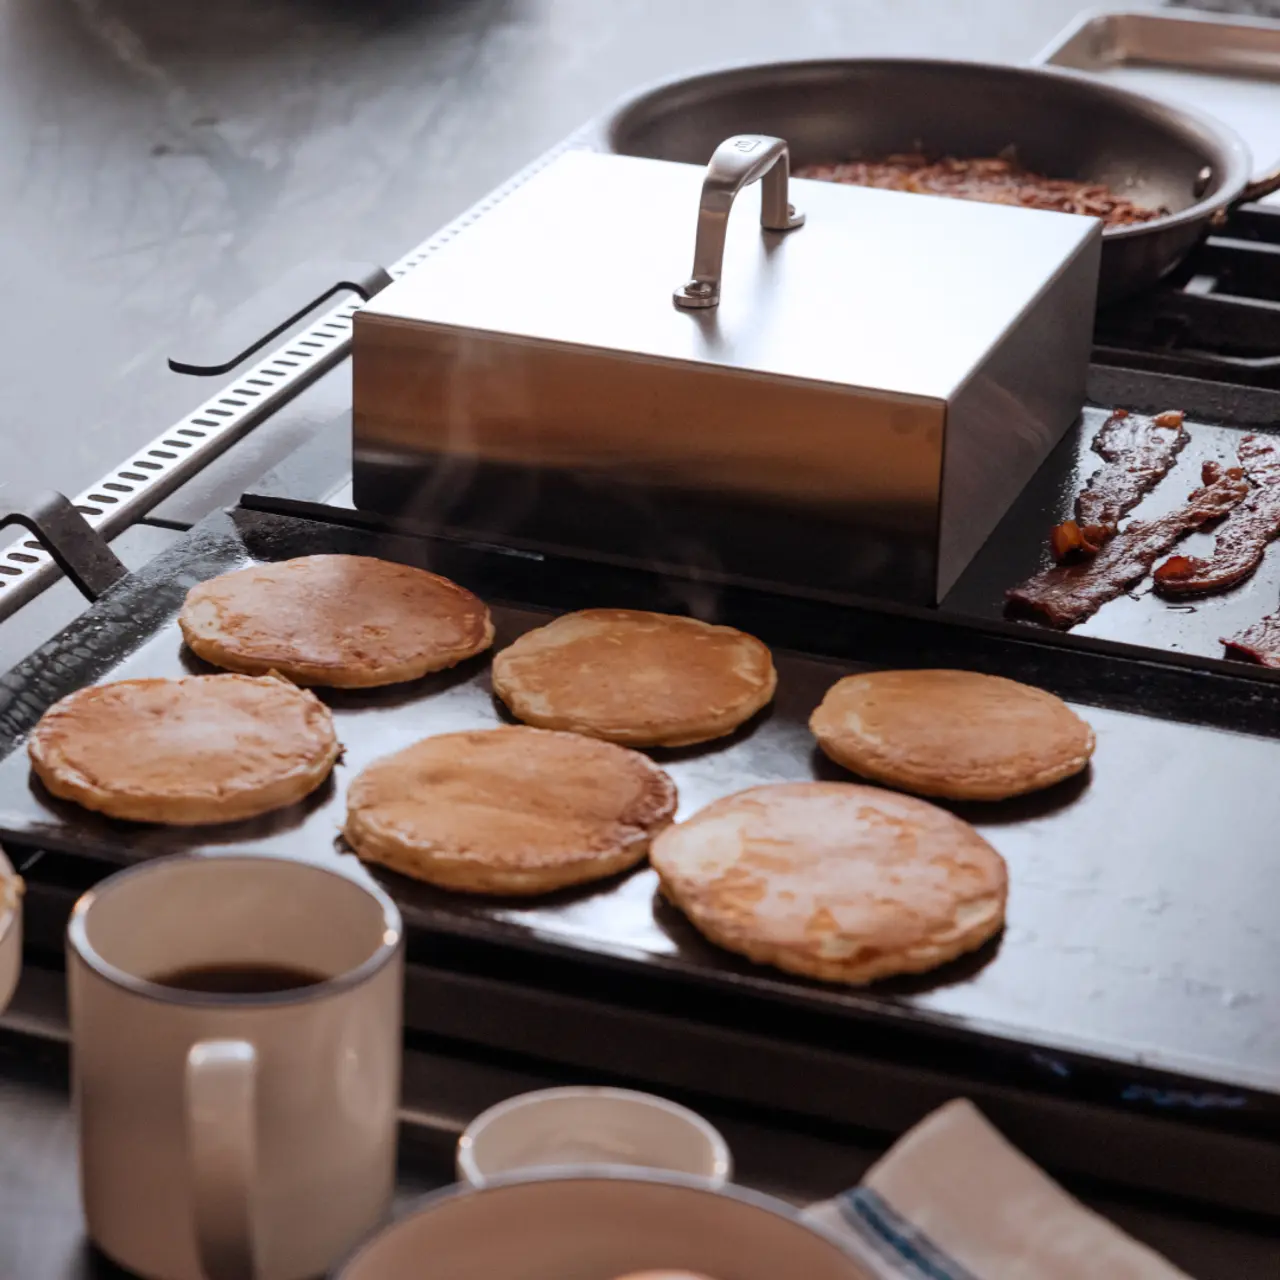 A griddle cooks pancakes beside a skillet with bacon and a mug, conveying a breakfast preparation scene.